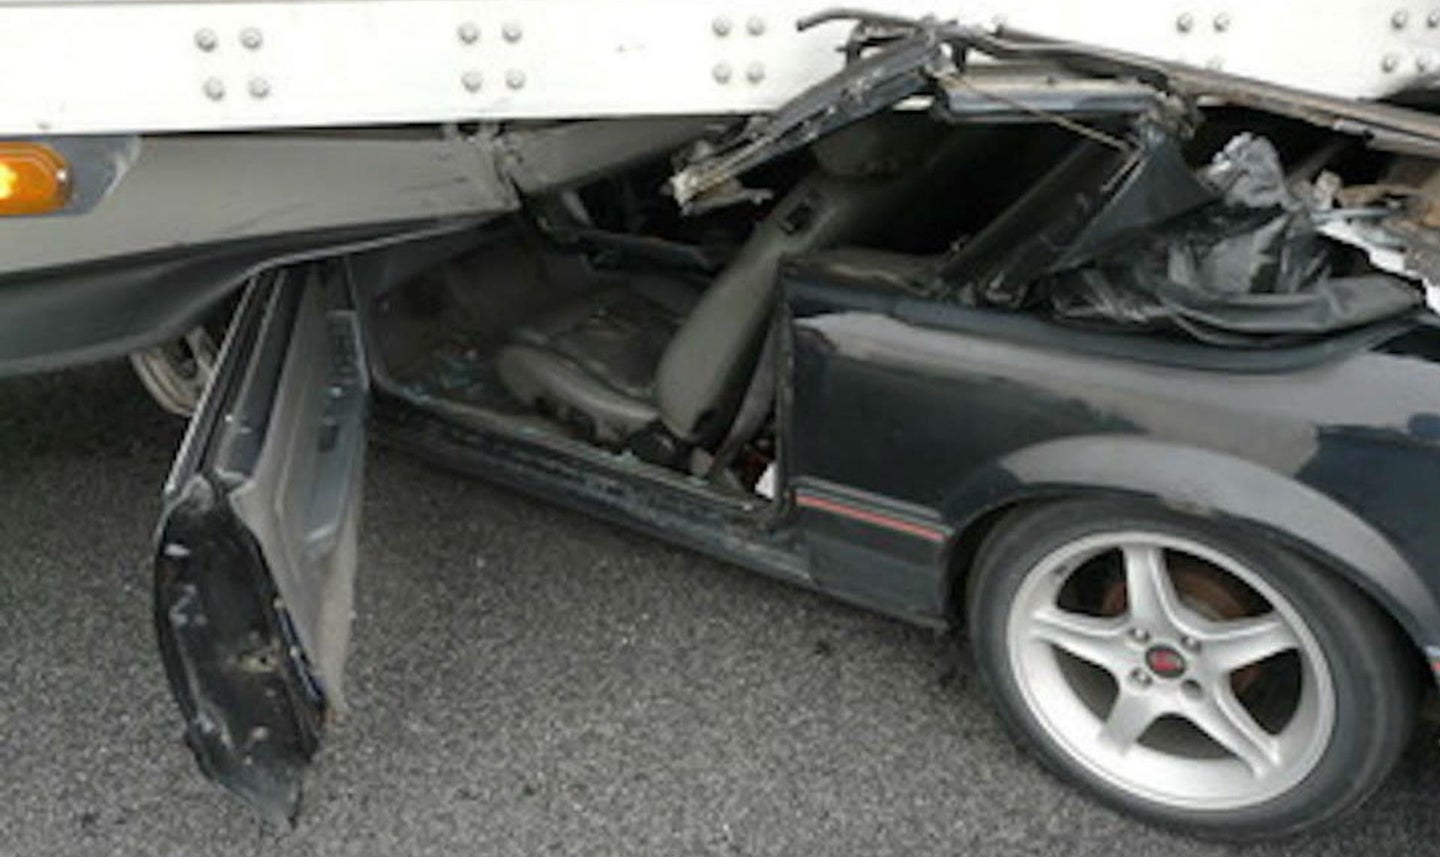 Semi Truck Driver Drags Crushed Ford Mustang for Half-Mile Before Realizing Something’s Wrong